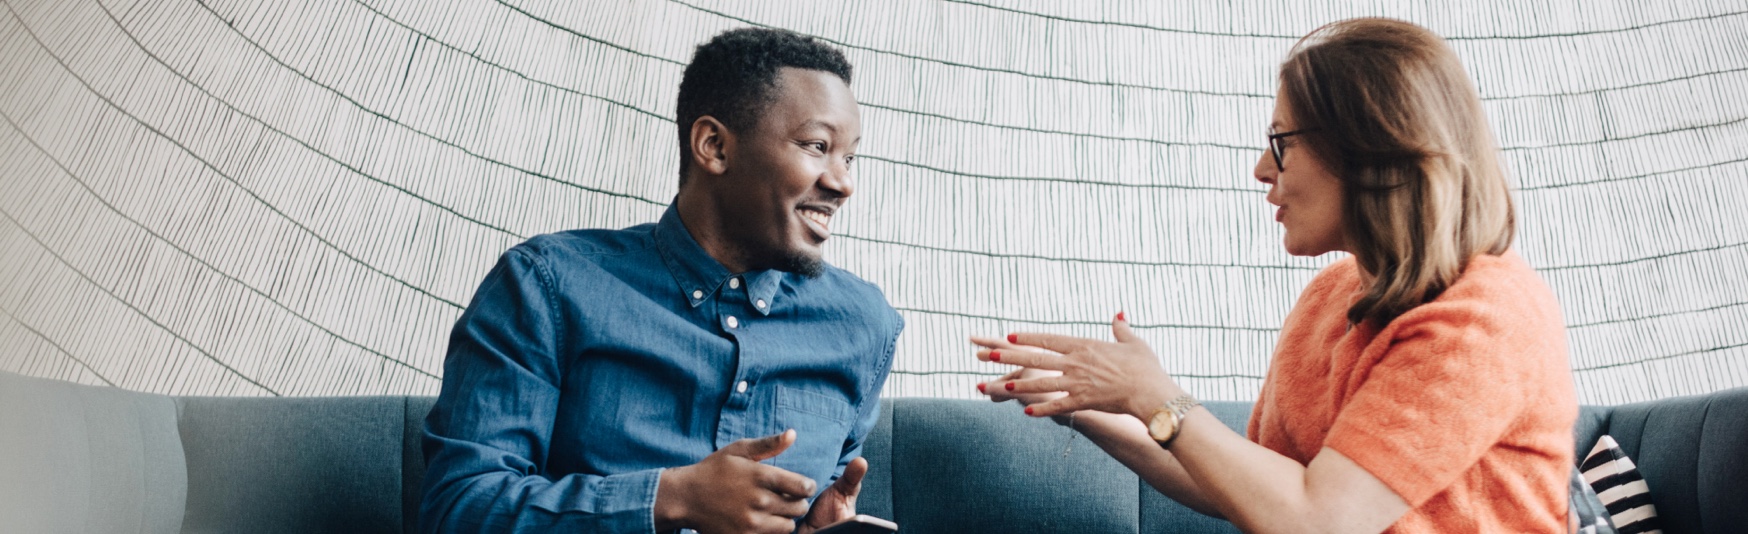 LP_Header-1748x534-white-woman-black-african-american-man-conversation-couch-business-meeting-smiling